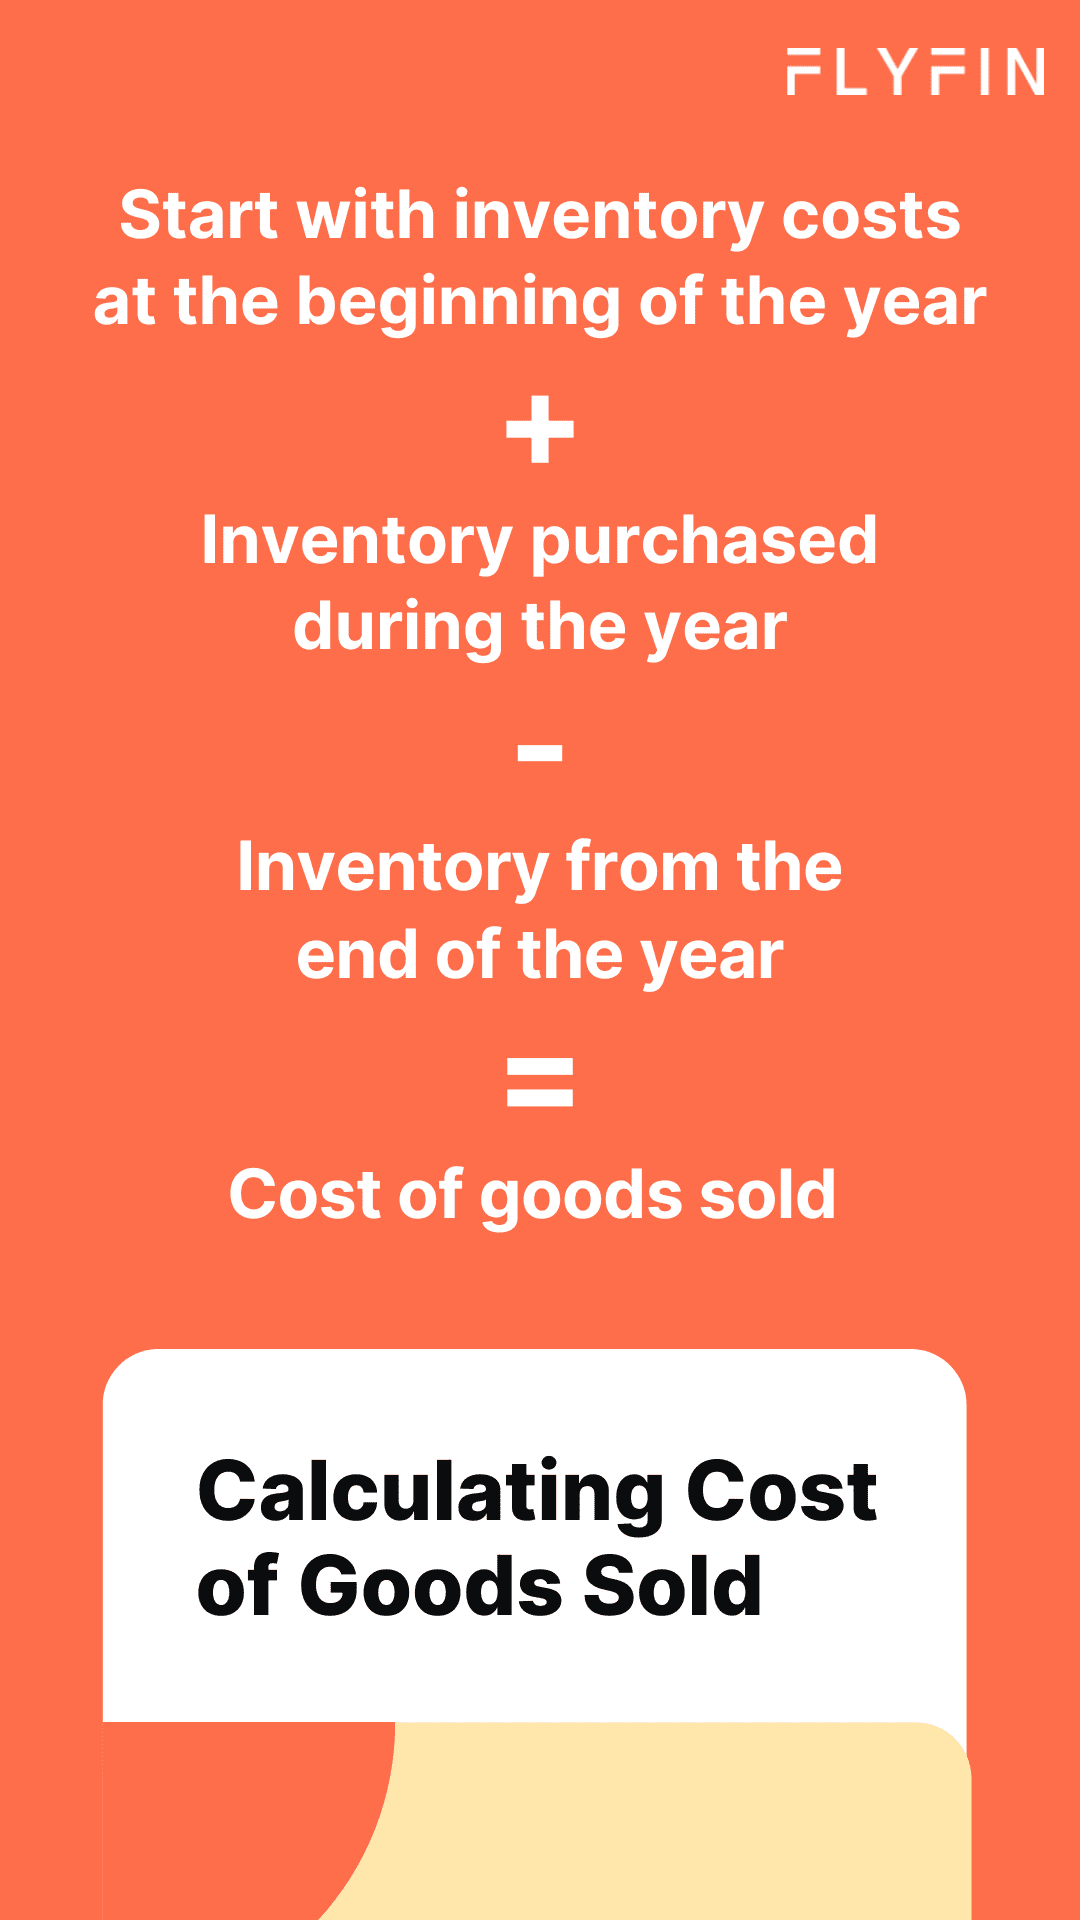 A flowchart showing the calculation of Cost of Goods Sold, including inventory costs at the beginning and end of the year, inventory purchased during the year, and cost of goods sold. Relevant for self-employed, 1099, and freelancer taxes.